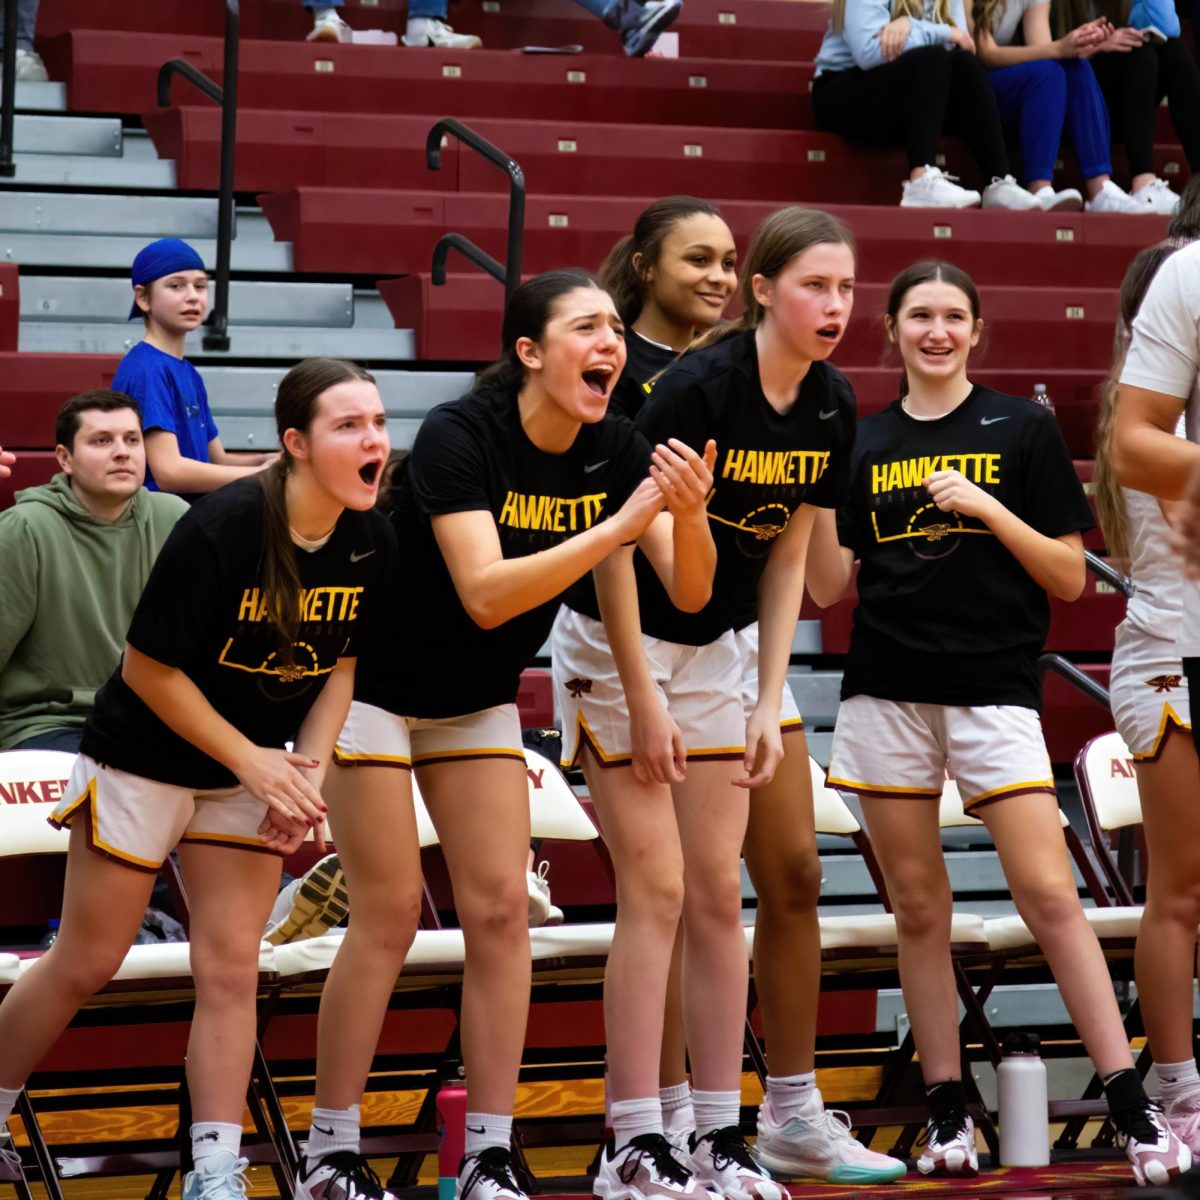 Ankeny cheers on their teammates after a big score. The Hawkettes defeated Urbandale 50-29.